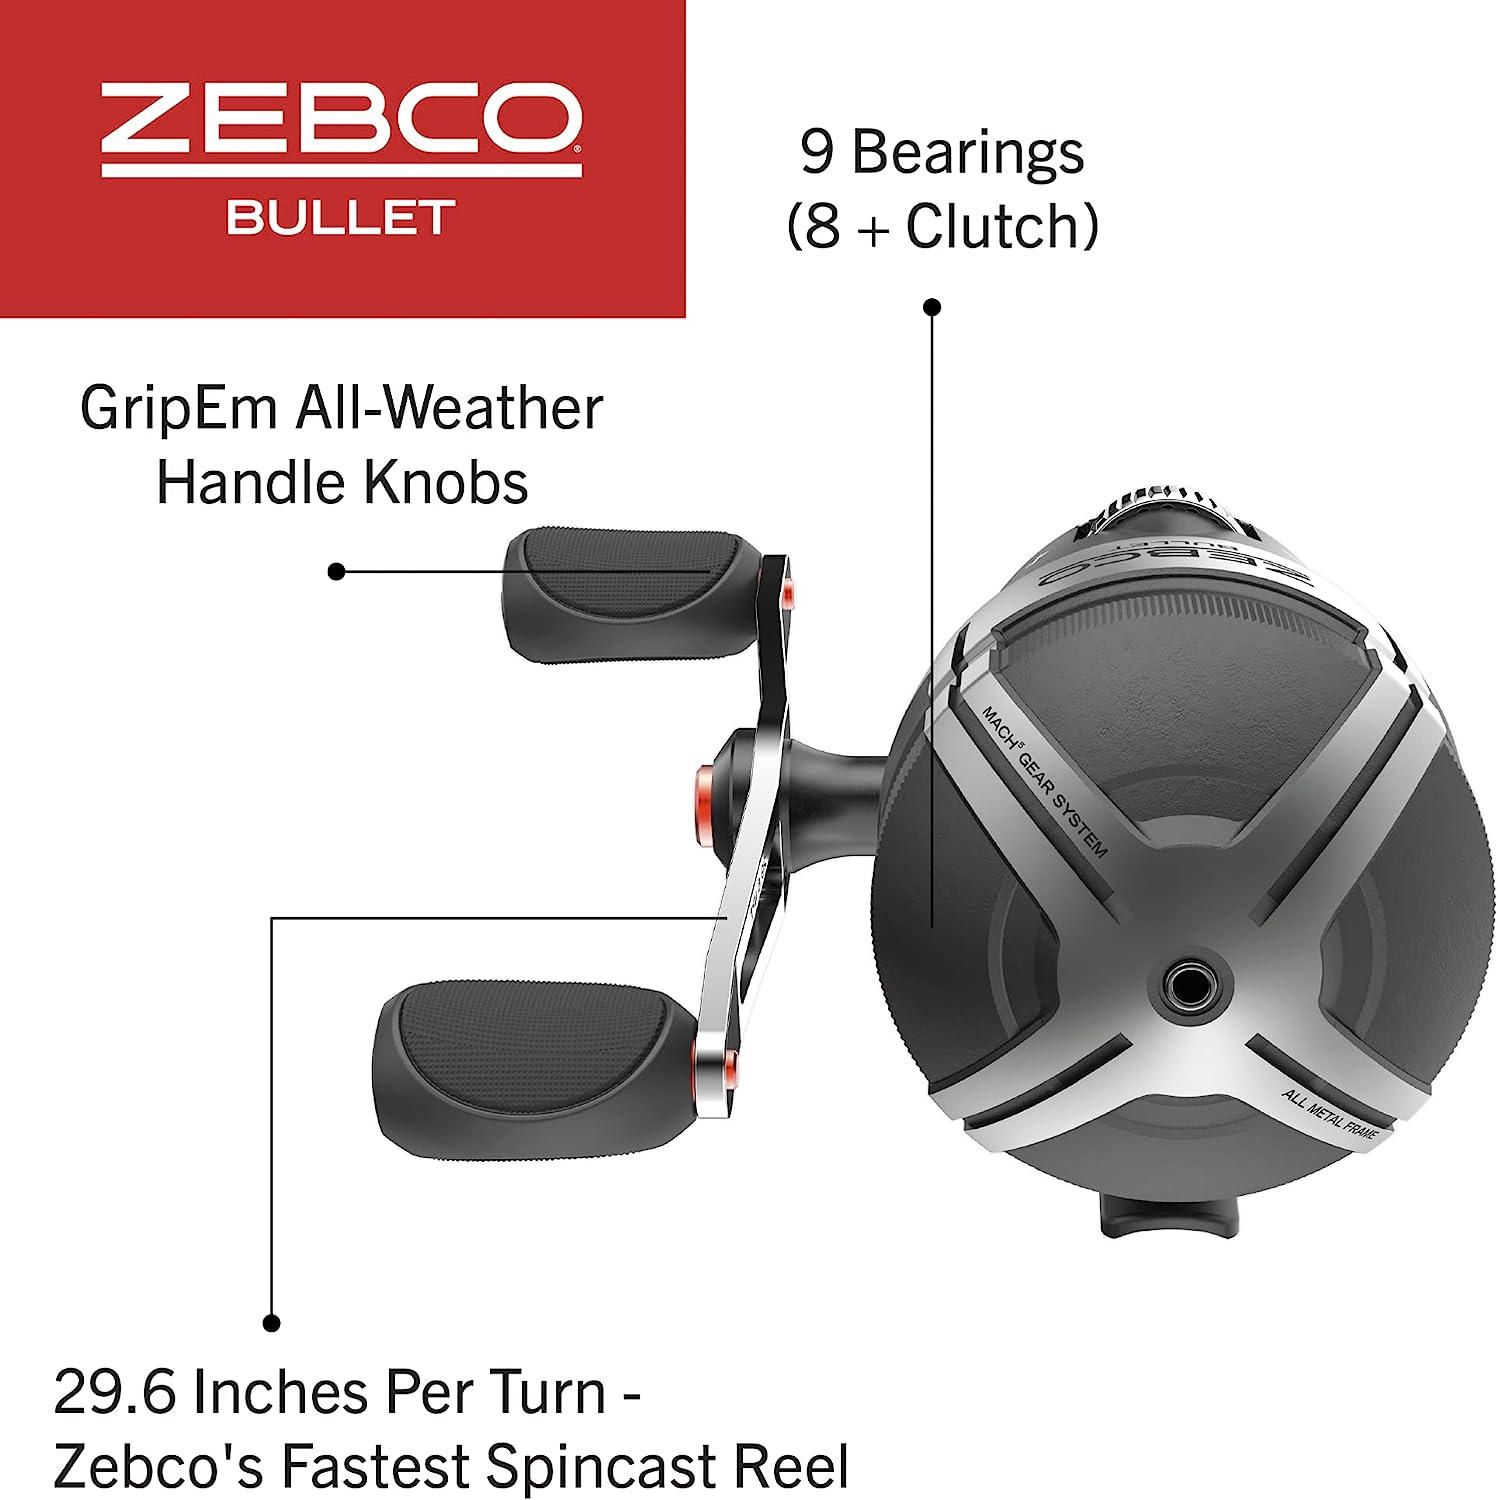 Zebco Bullet Spincast Fishing Reel, Size 30 Reel, Fast 29.6 Inches